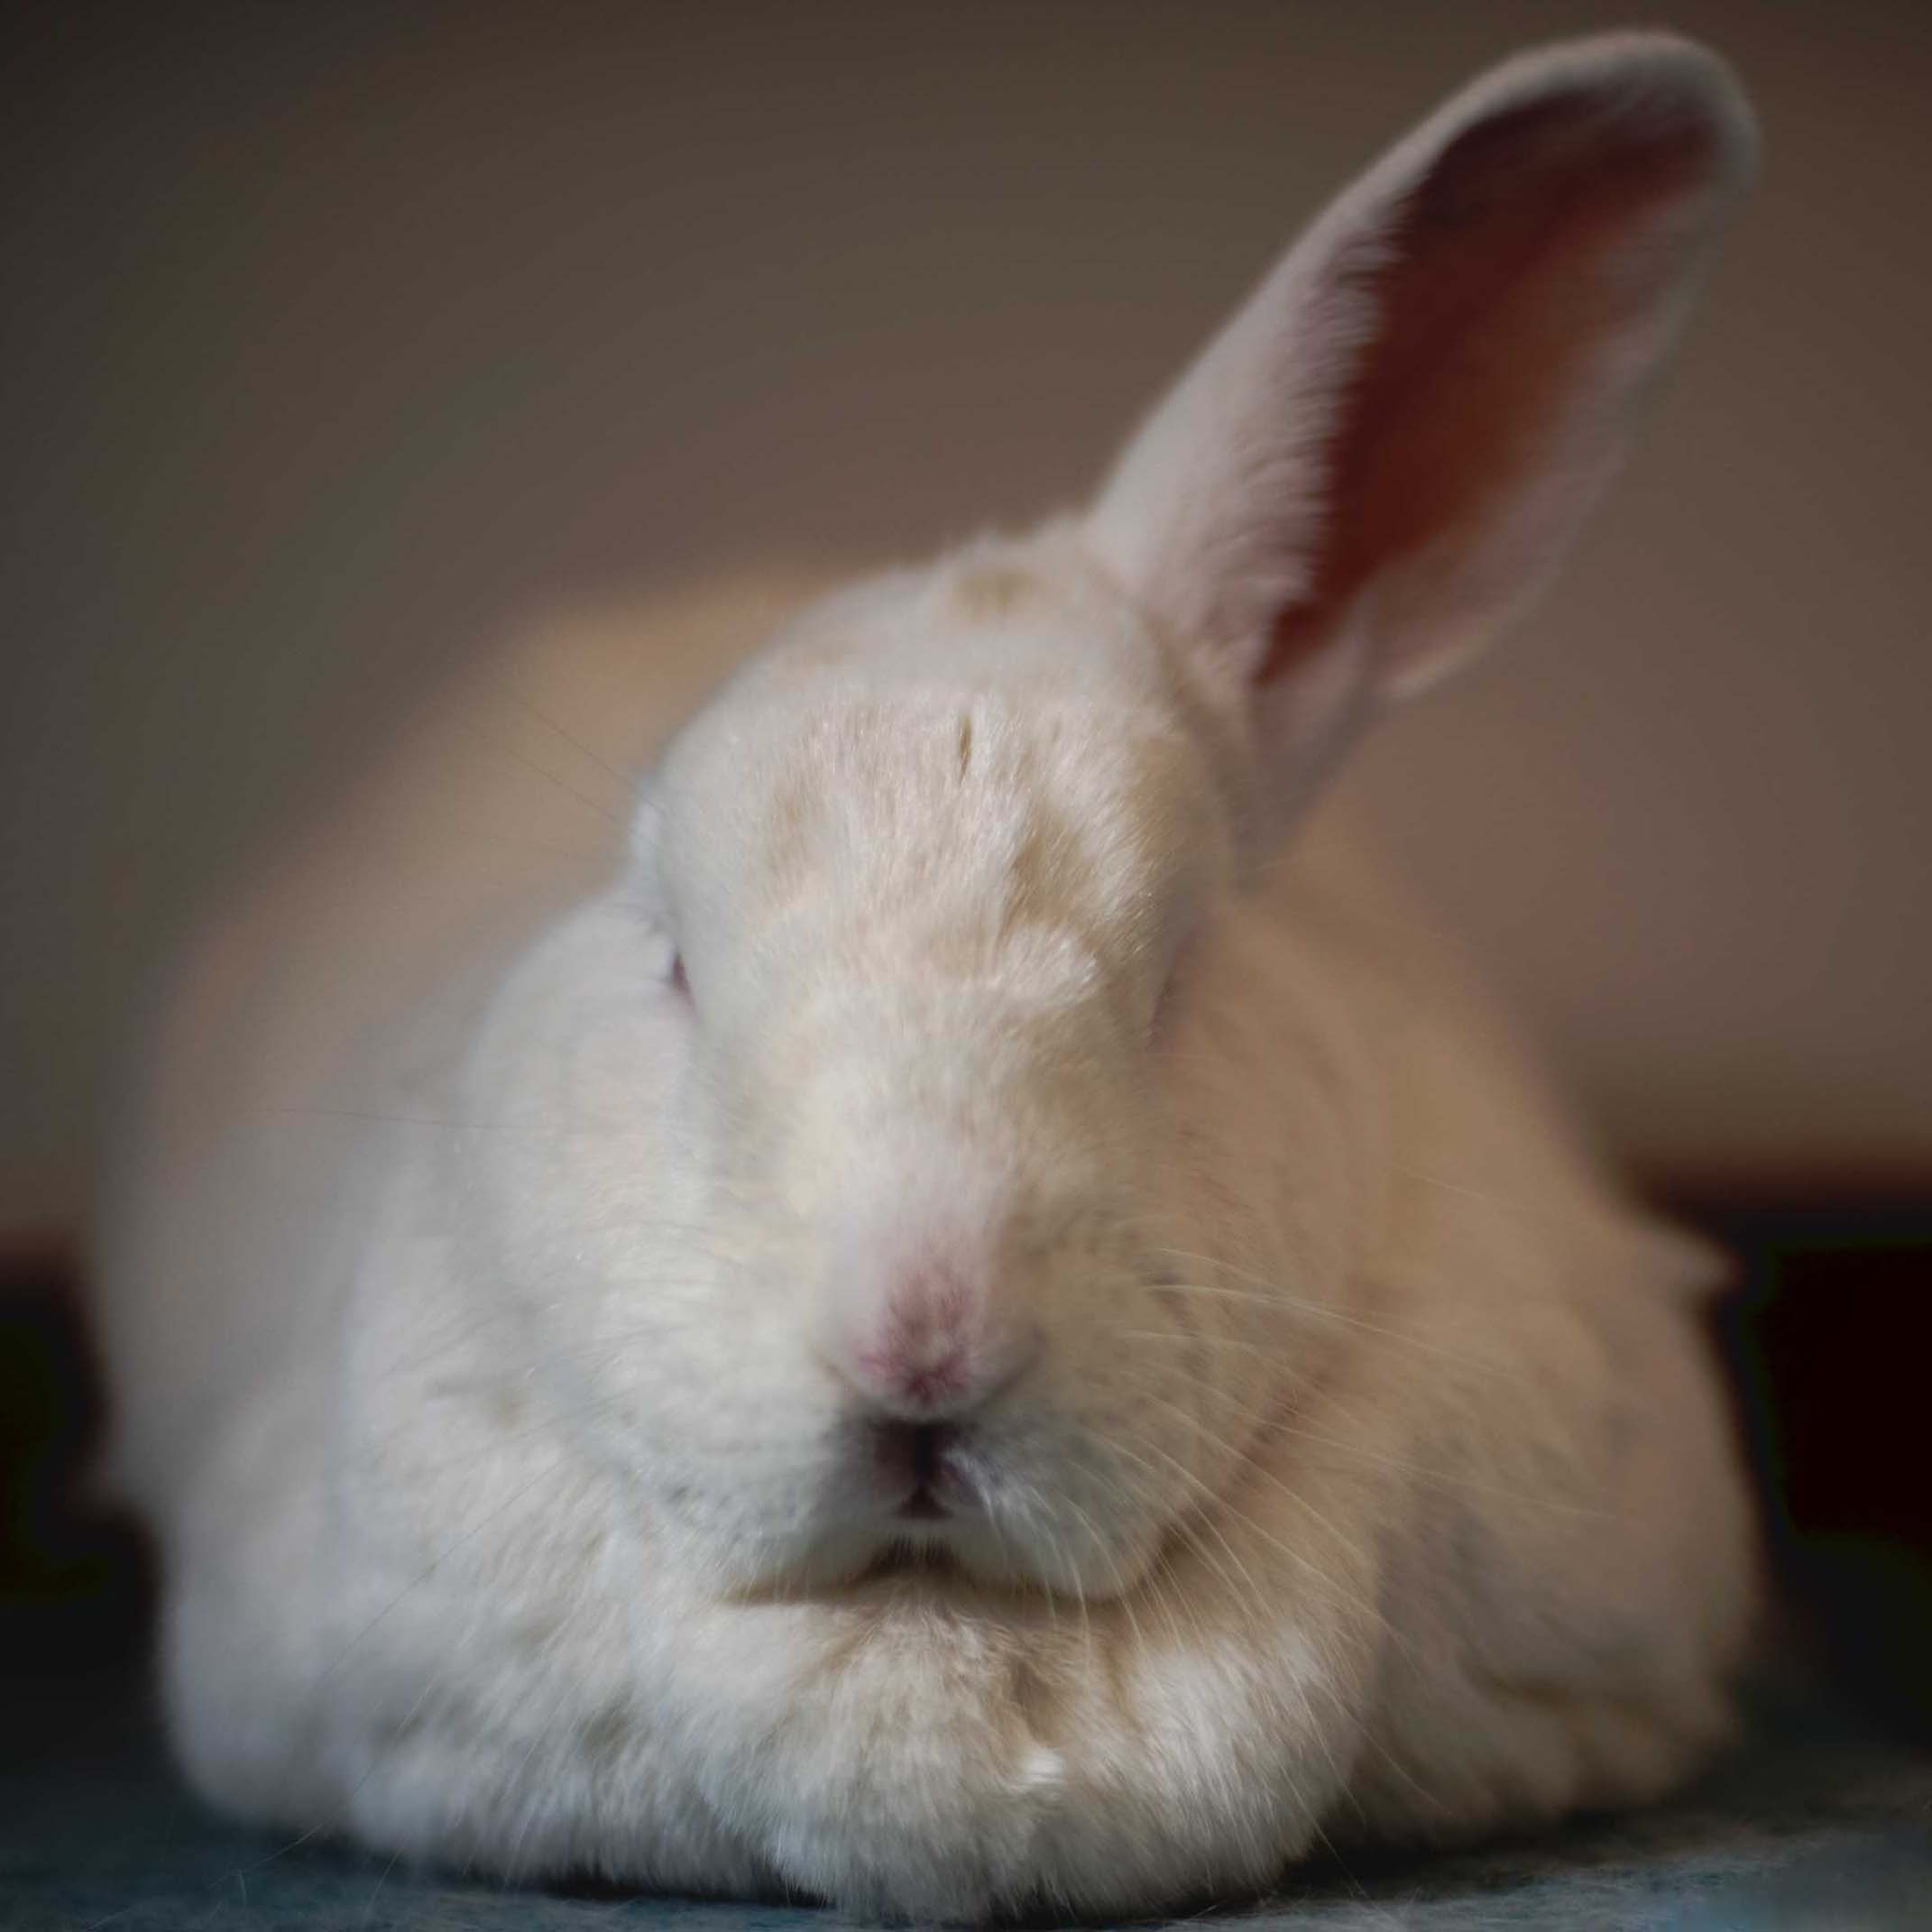 Rabbit naps with one ear raised.